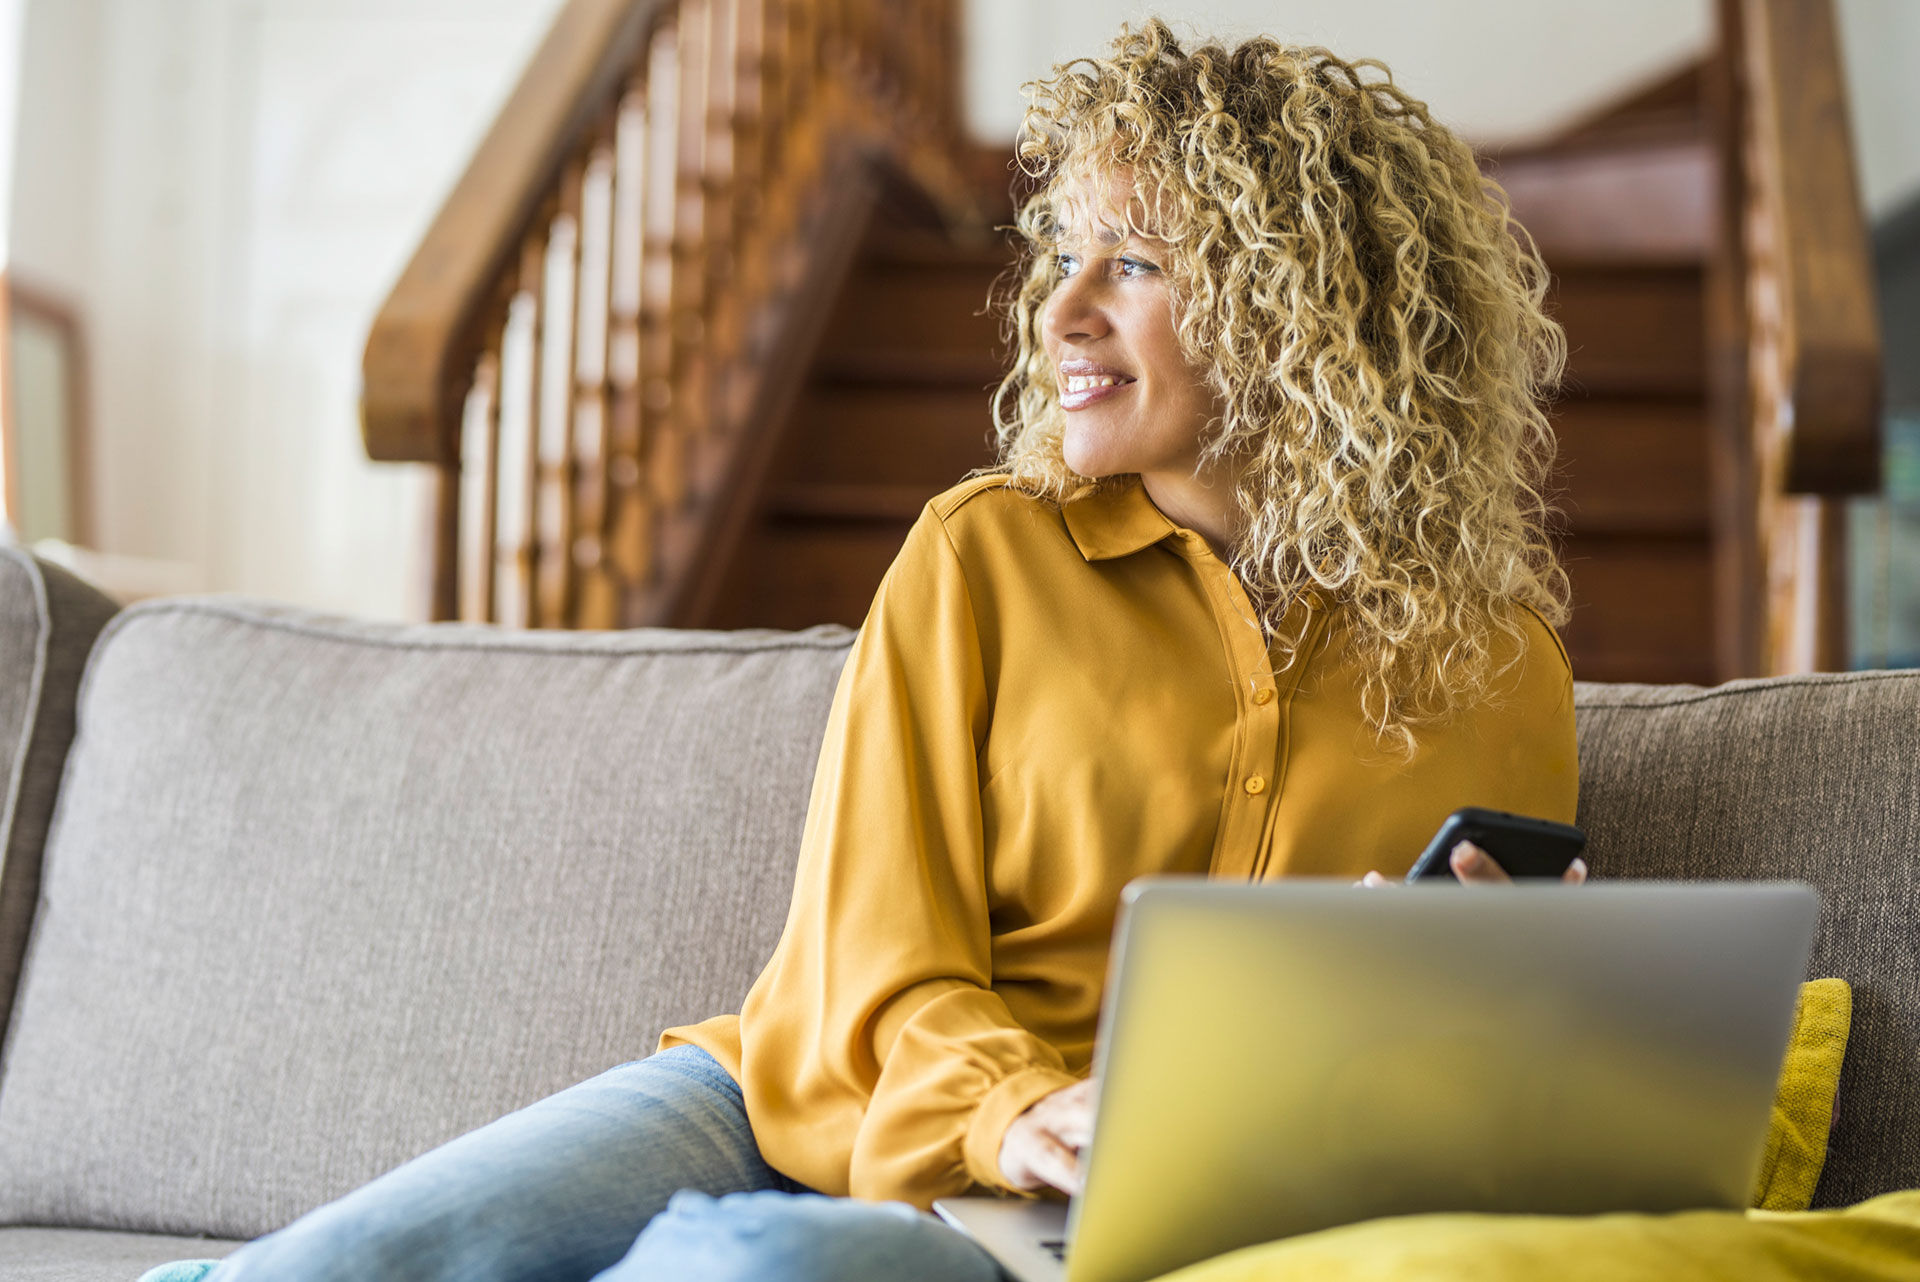 Woman with blonde long curly hair work at home on laptop computer